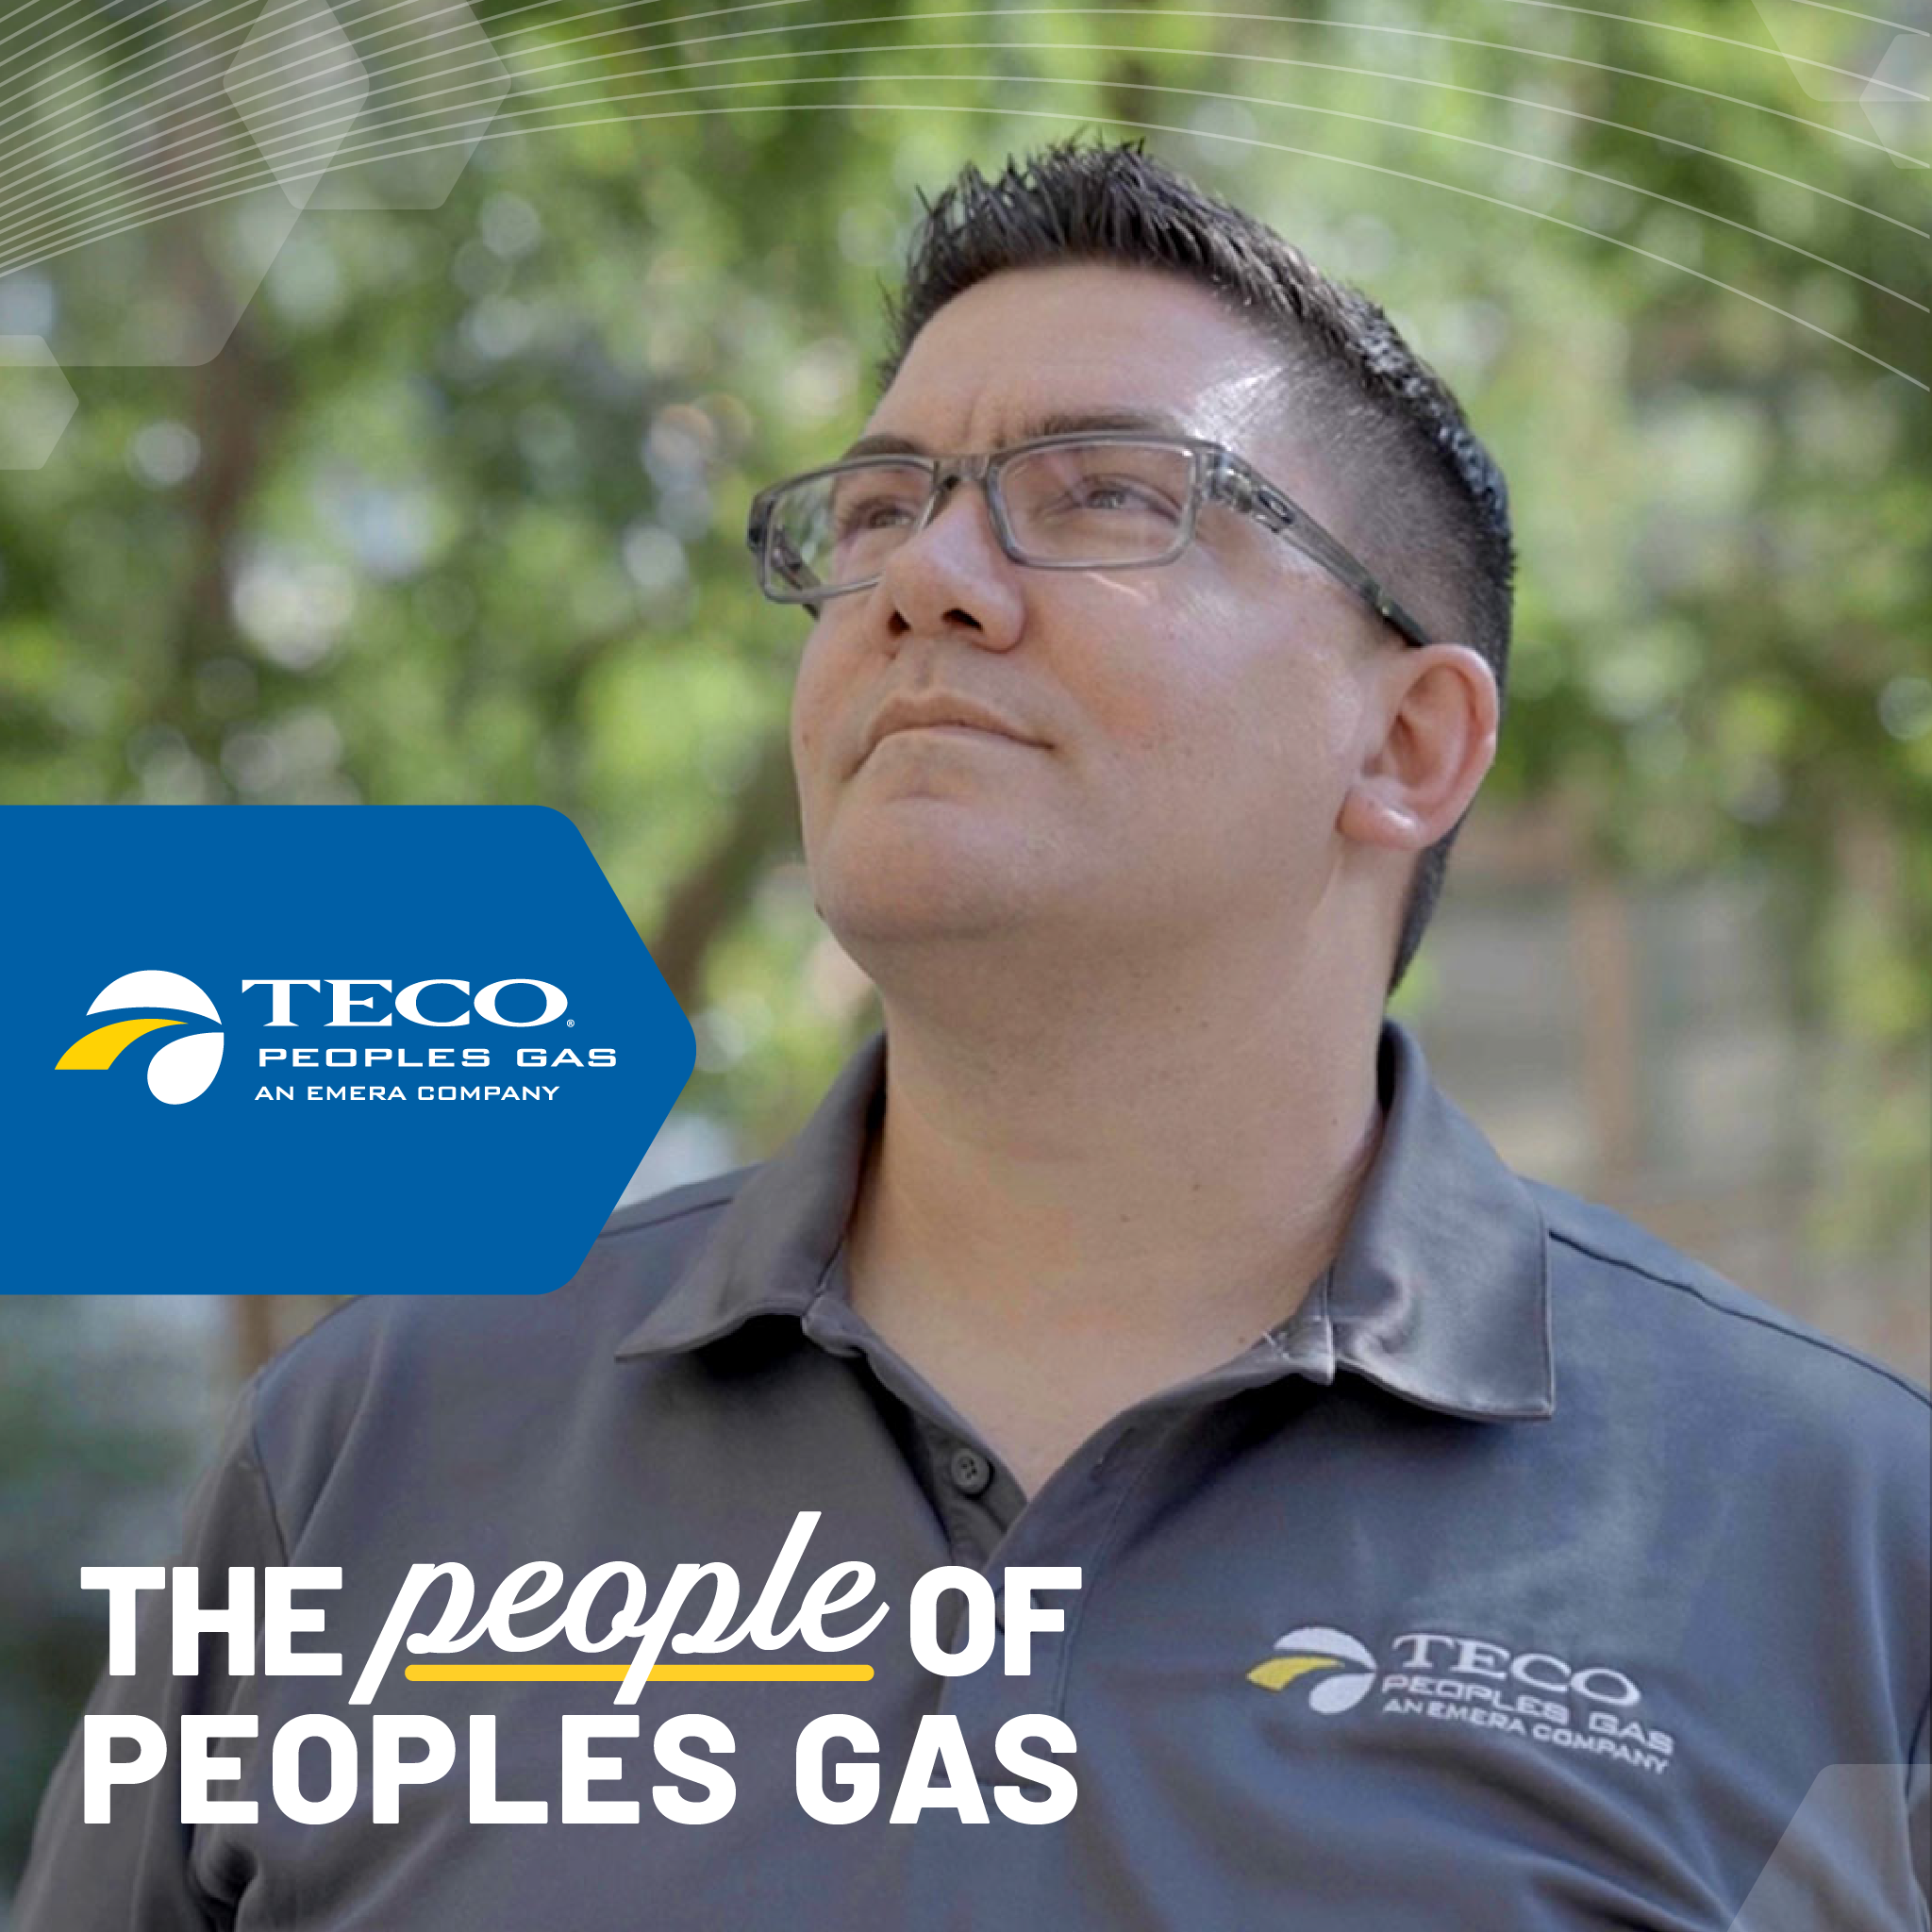 The people of Peoples Gas: Kelly Knigge